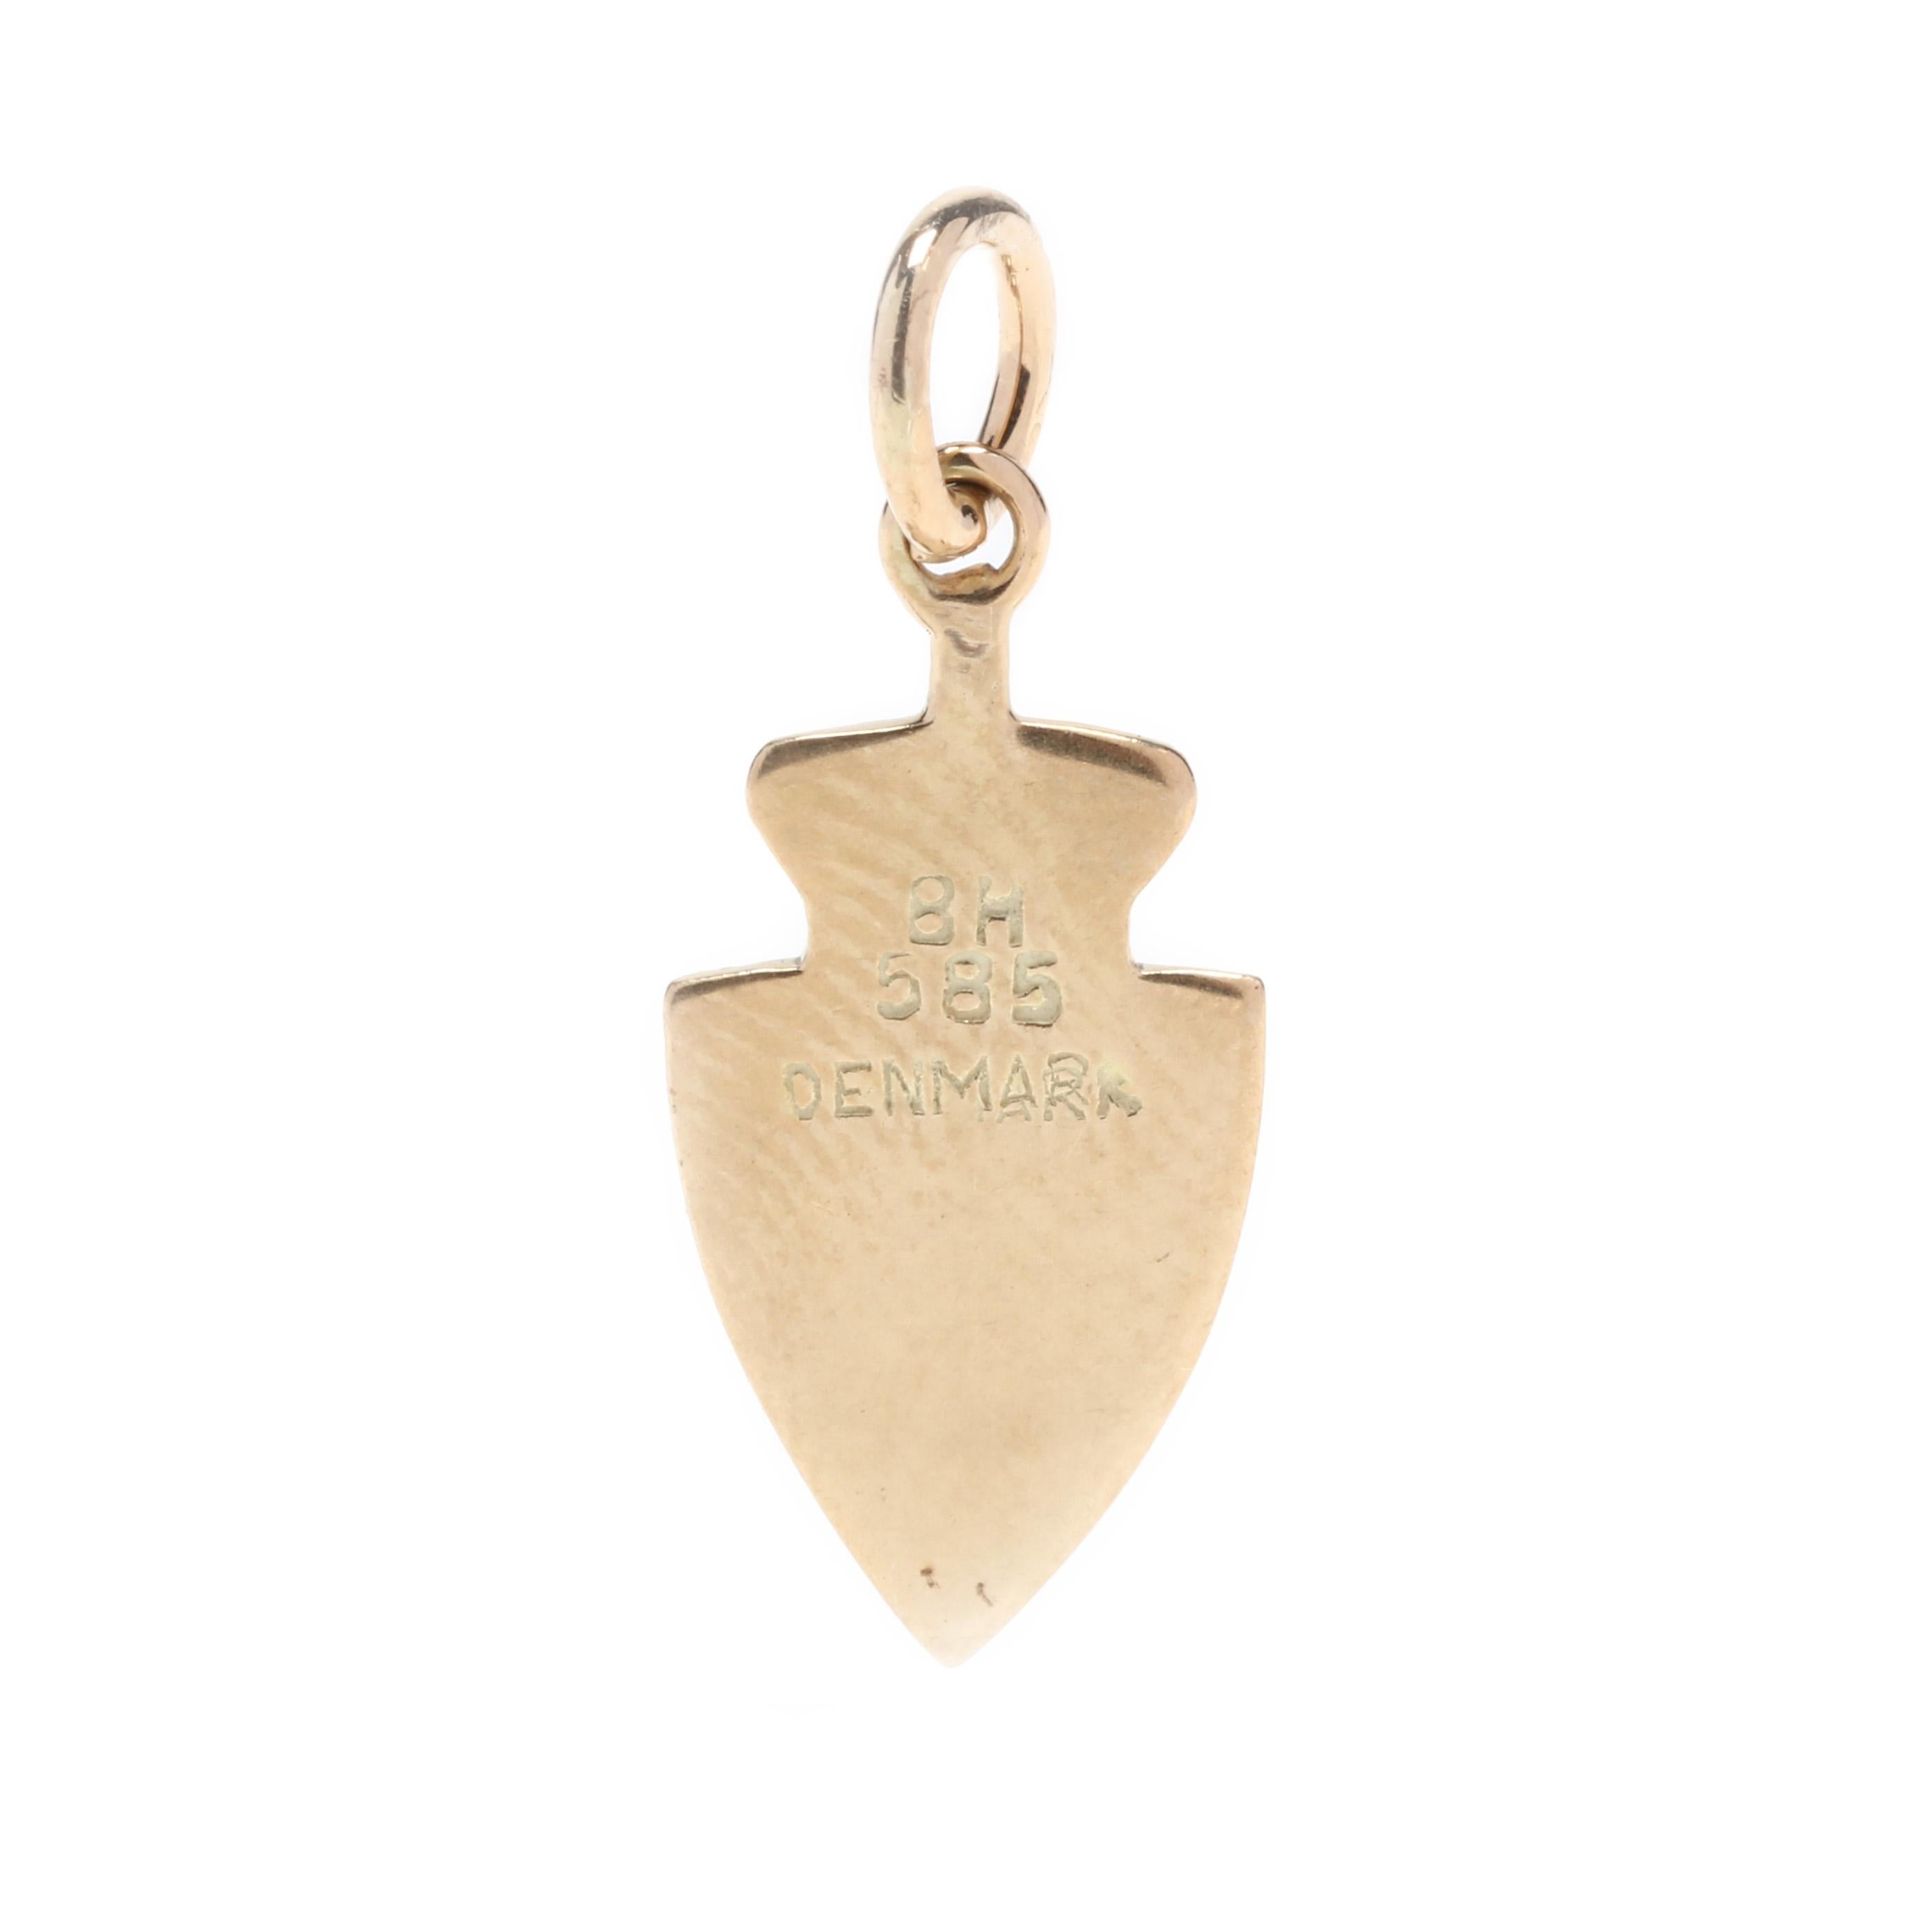 A vintage 14 karat yellow gold Denmark coat of arms charm. This small charm features  an engraved crown motif sitting atop a shield shape with the enameled coat of arms of Denmark and with a thin bail.

Length: 3/4 in.

Width: 3/8 in.

Weight: .80